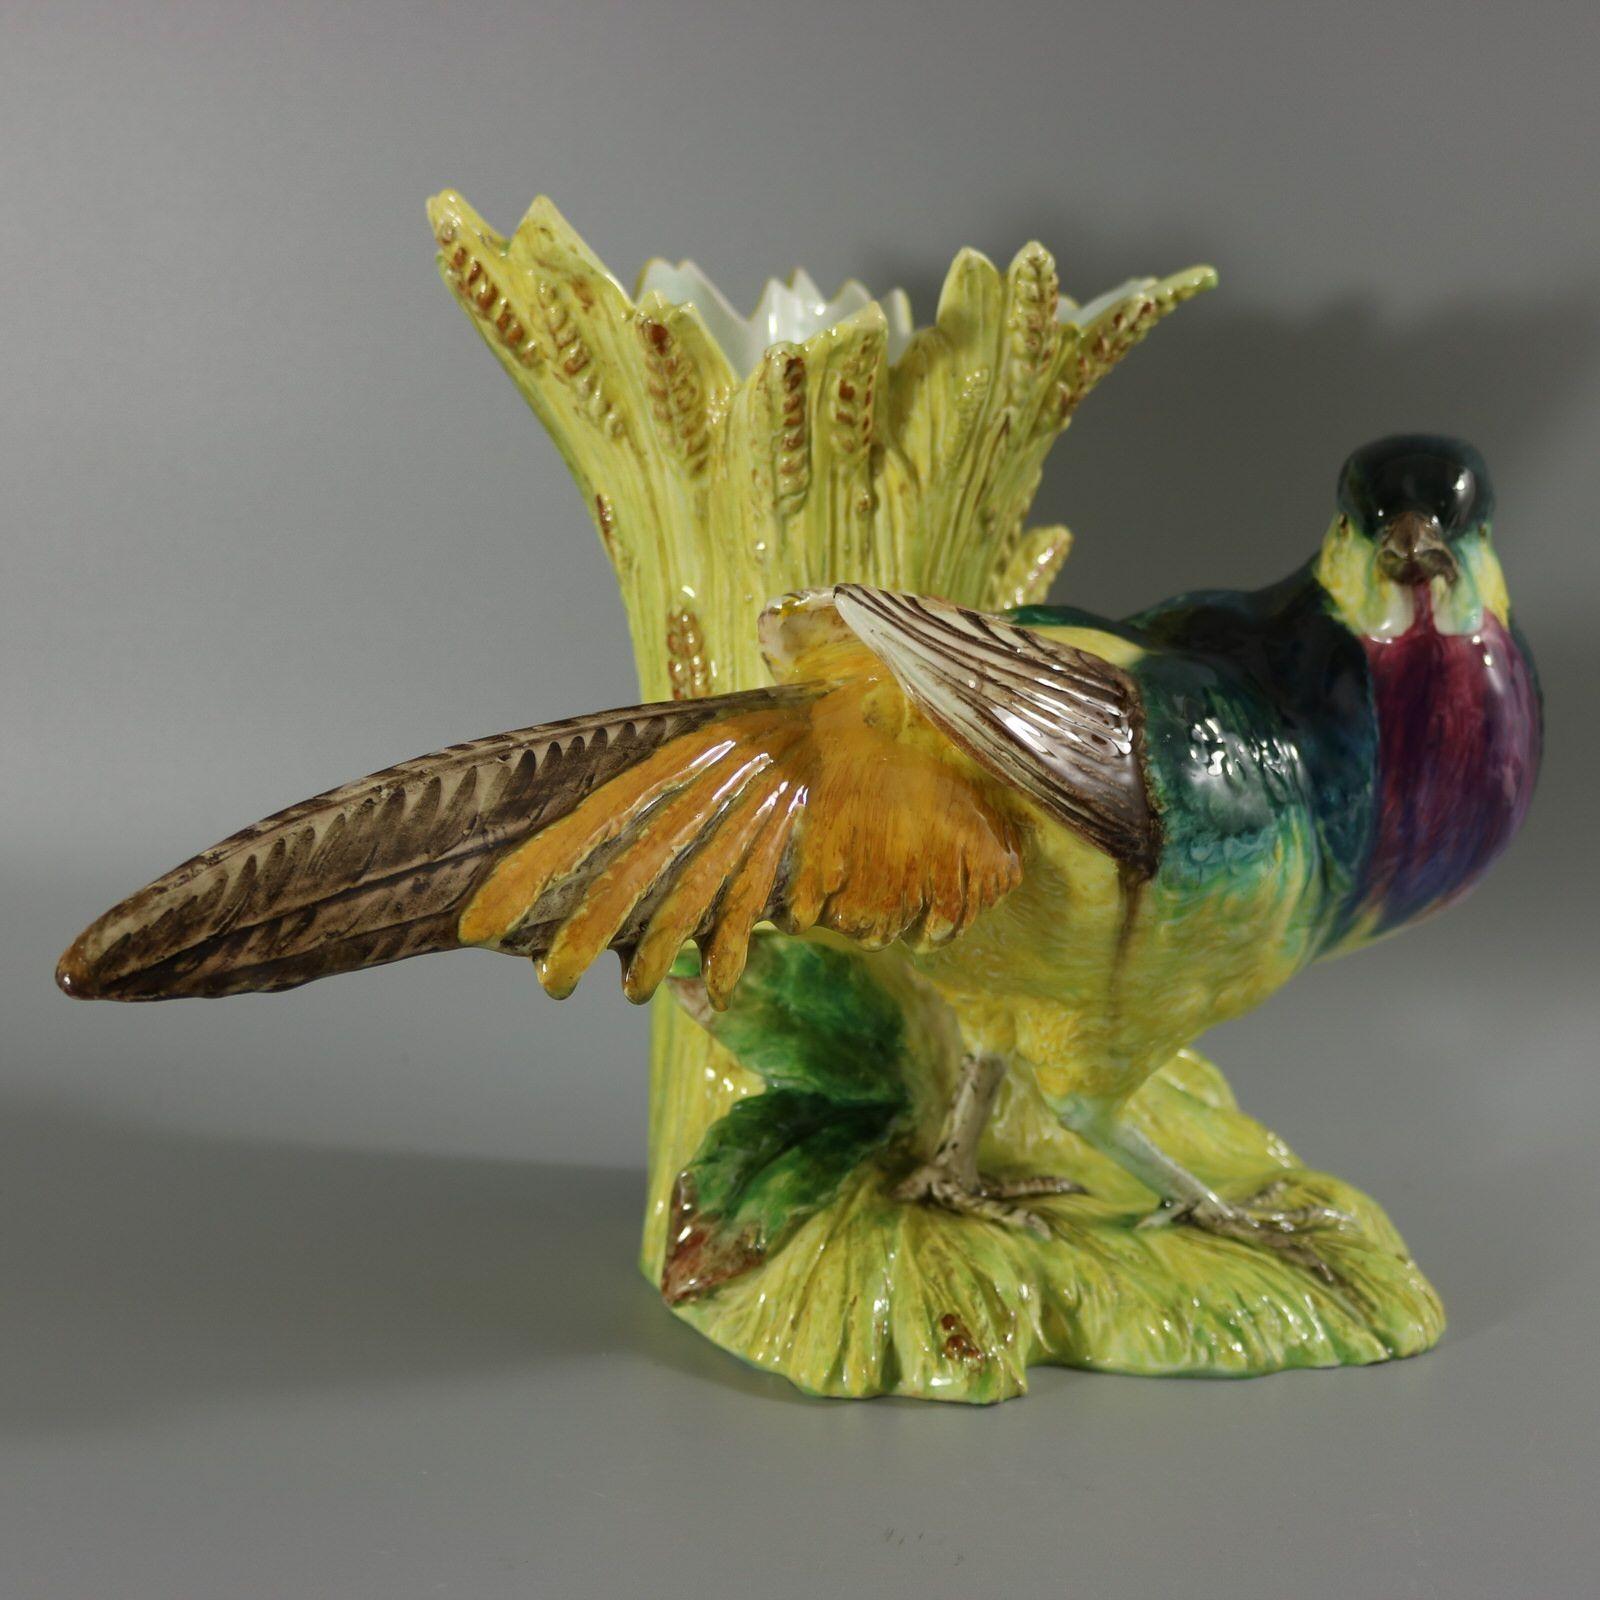 Jerome Massier Fils Majolica figural vase which features a colourful pheasant stood in front of corn/wheat. Colouration: green, purple, teal blue are predominant. The piece bears maker's marks for the Jerome Massier Fils pottery. Book reference